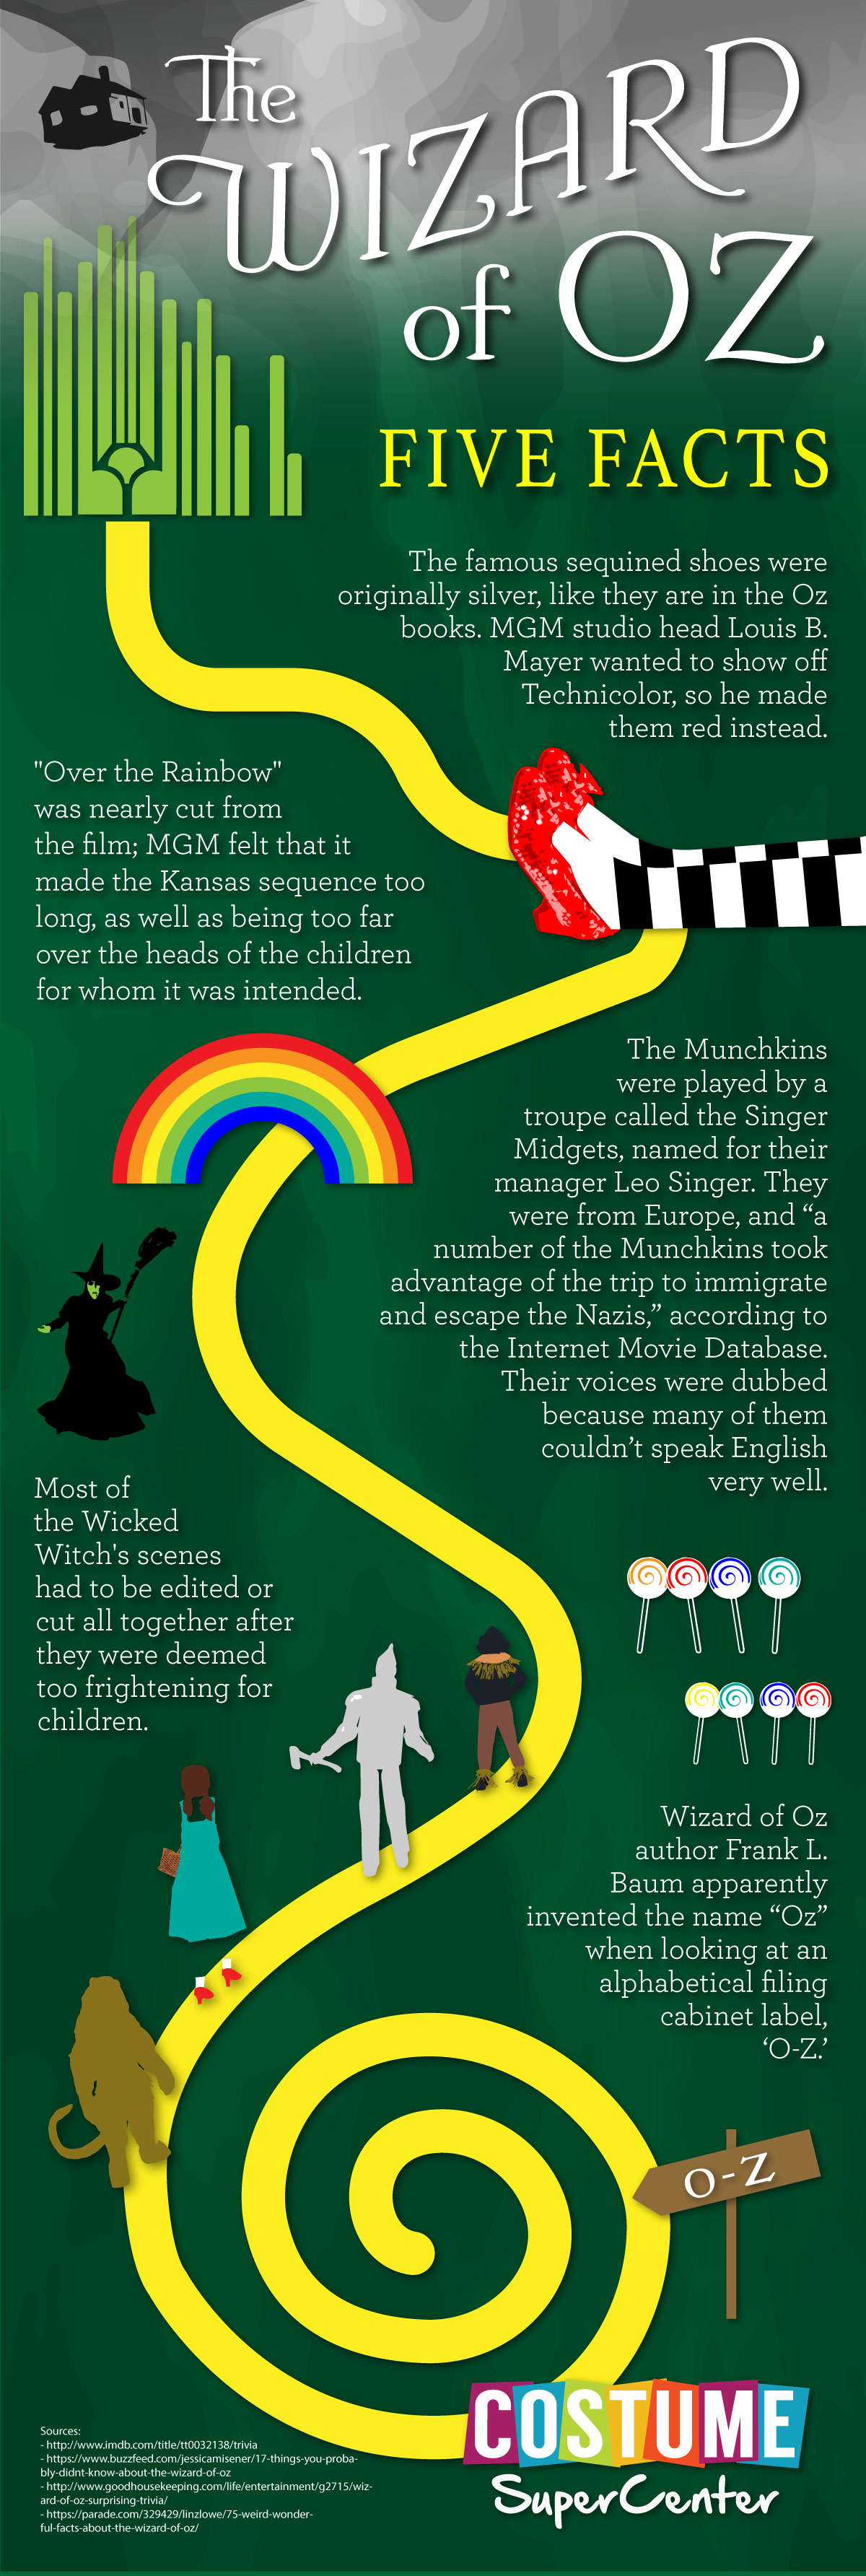 Five Things You May Not Know About the Wizard of Oz - Infographic